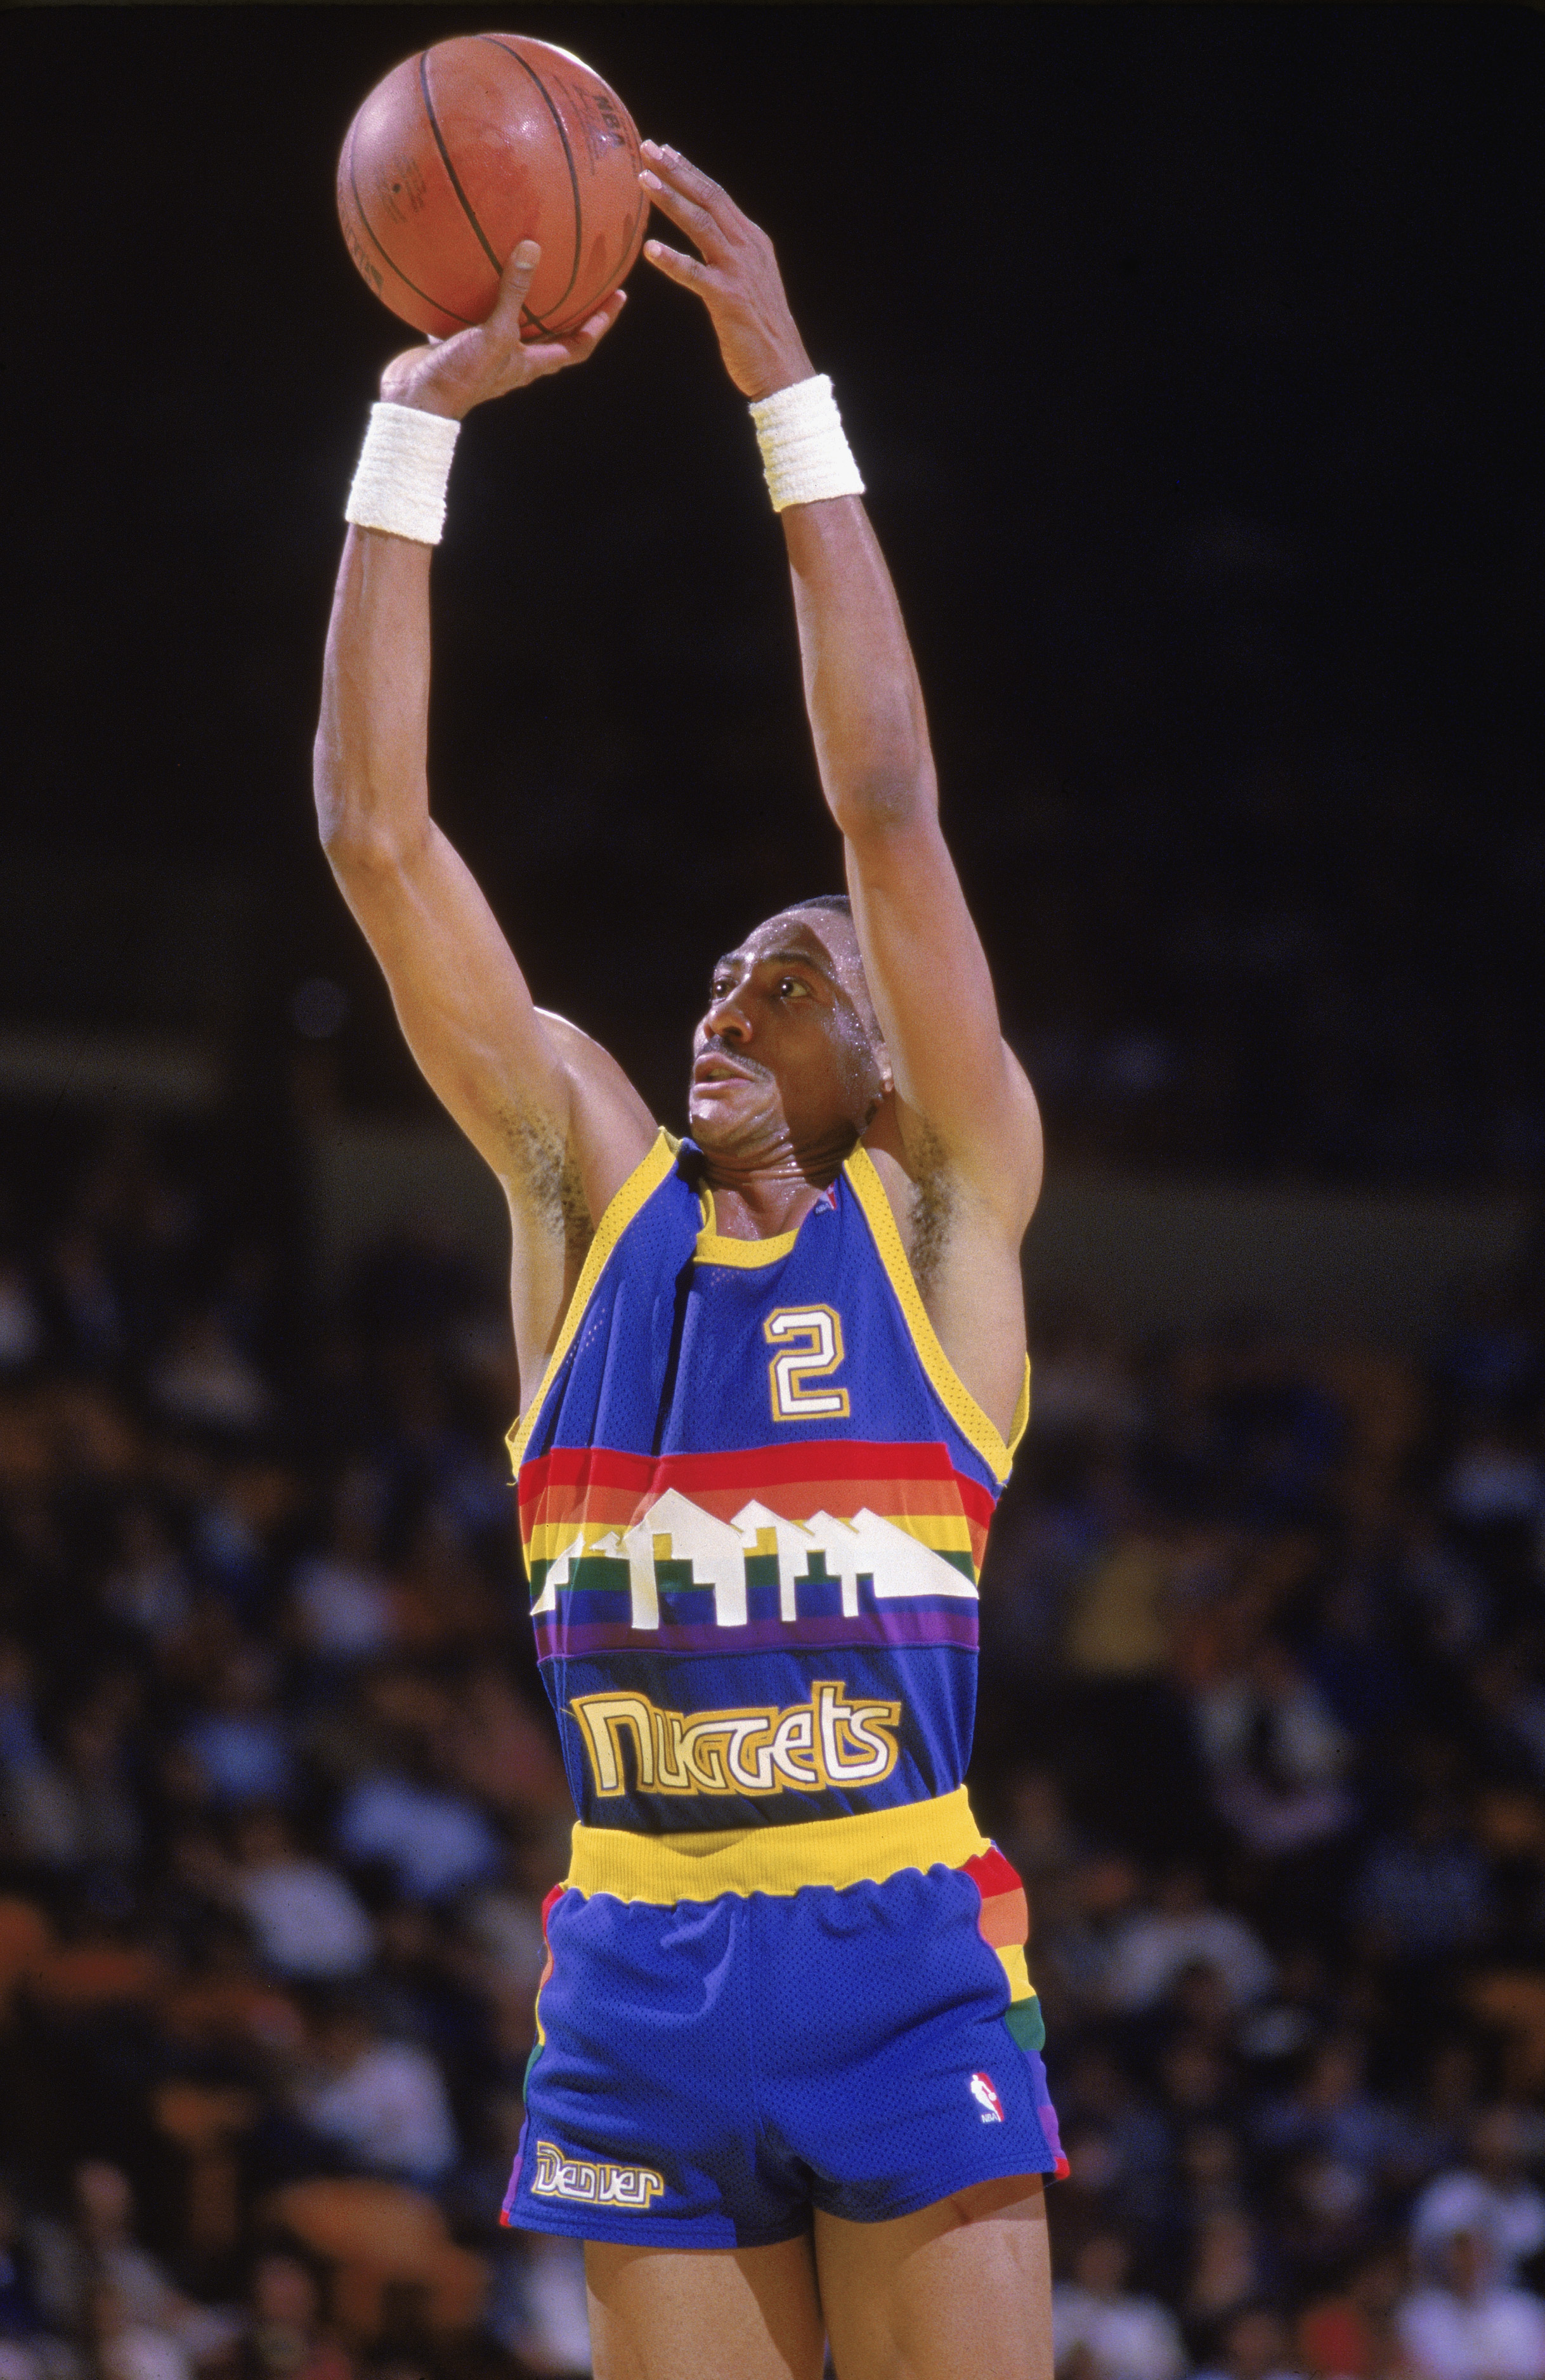 LOS ANGELES - 1986:  Alex English #2 of the Denver Nuggets shoots a jump shot during the game against the Los Angeles Lakers at the Great Western Forum in Los Angeles, California during the 1986-87 NBA season.  (Photo by: Stephen Dunn/Getty Images)